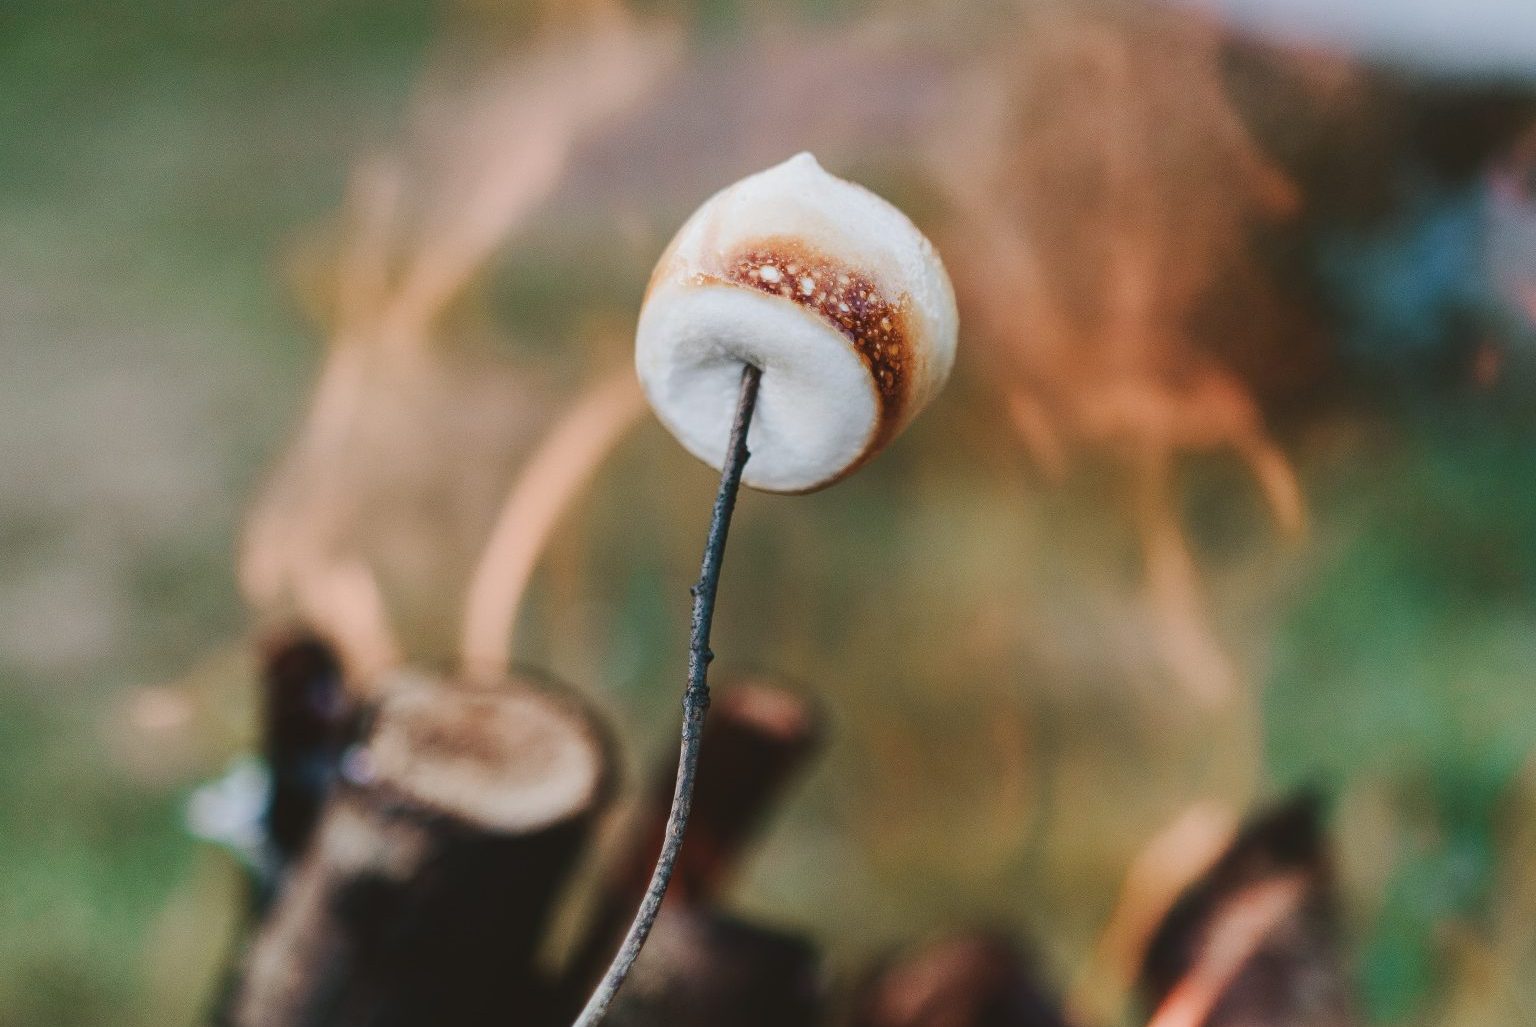 The Science of Roasting the Perfect Marshmallow